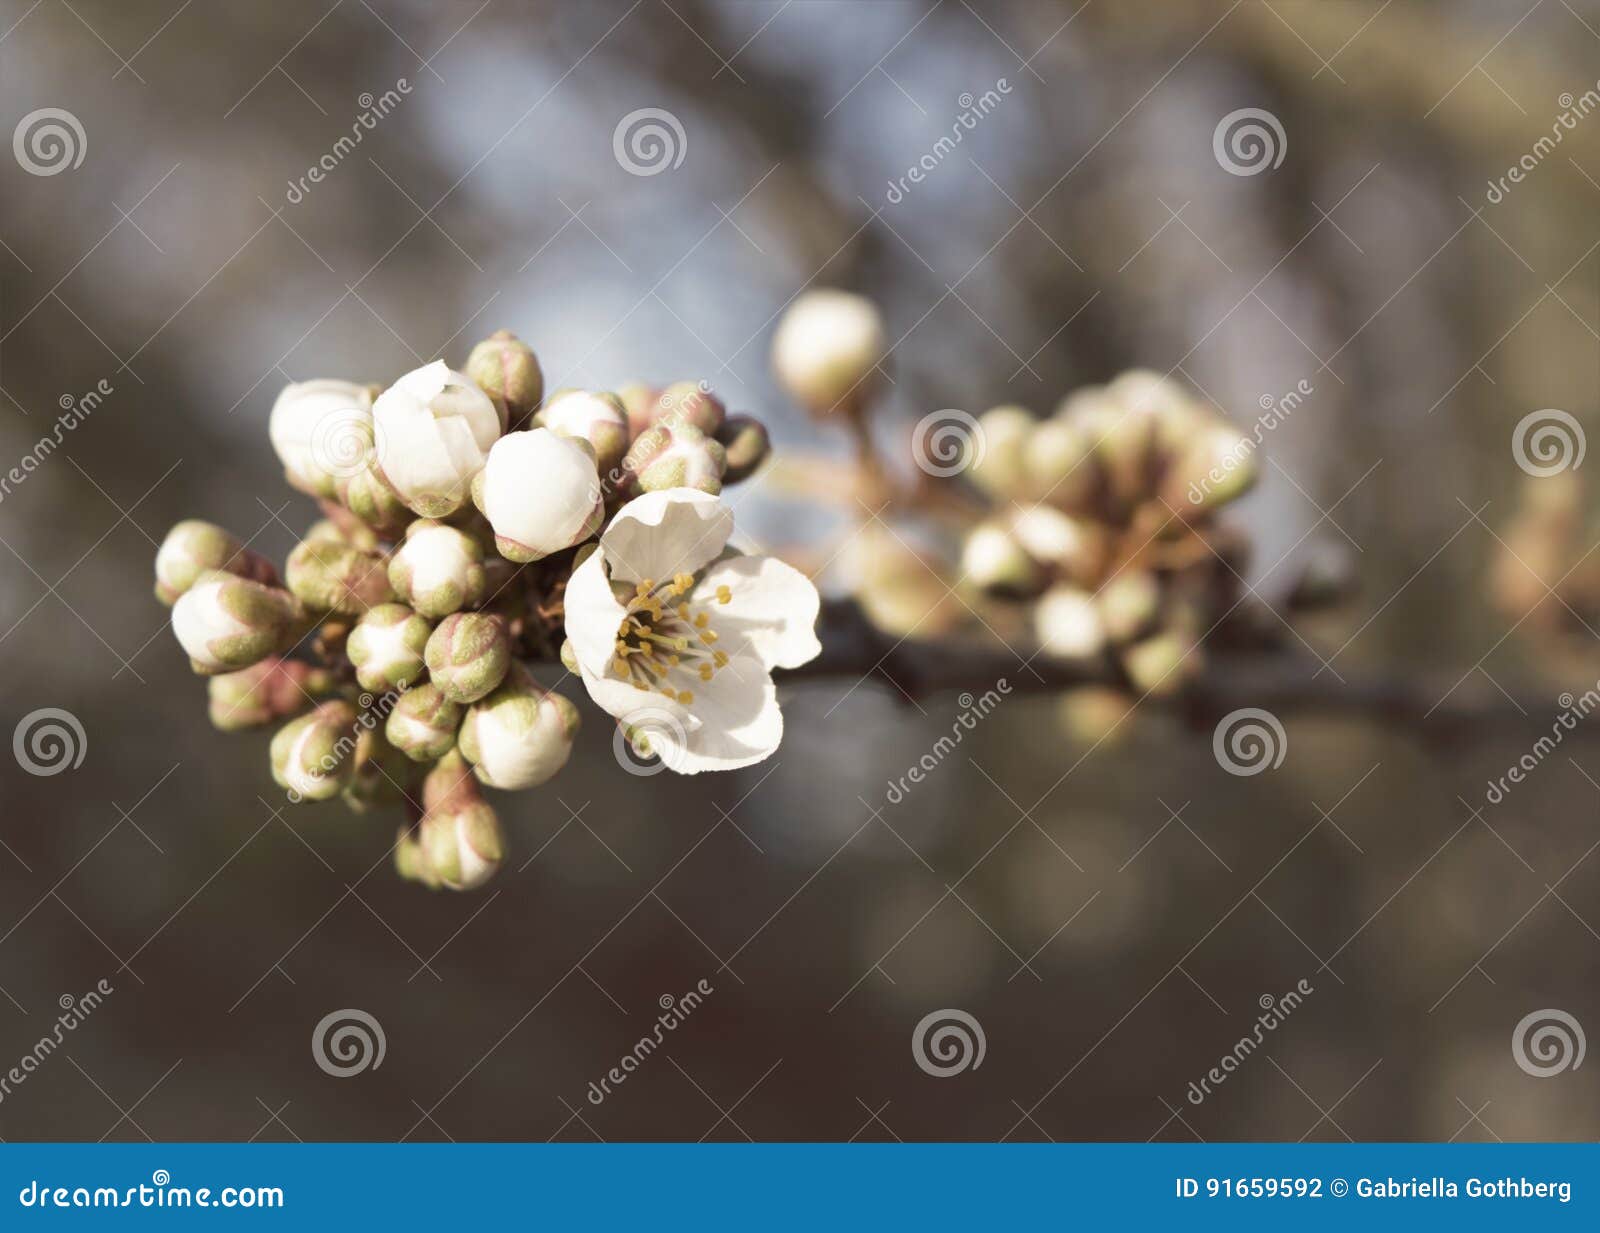 apple blossom branch with budding flowers.